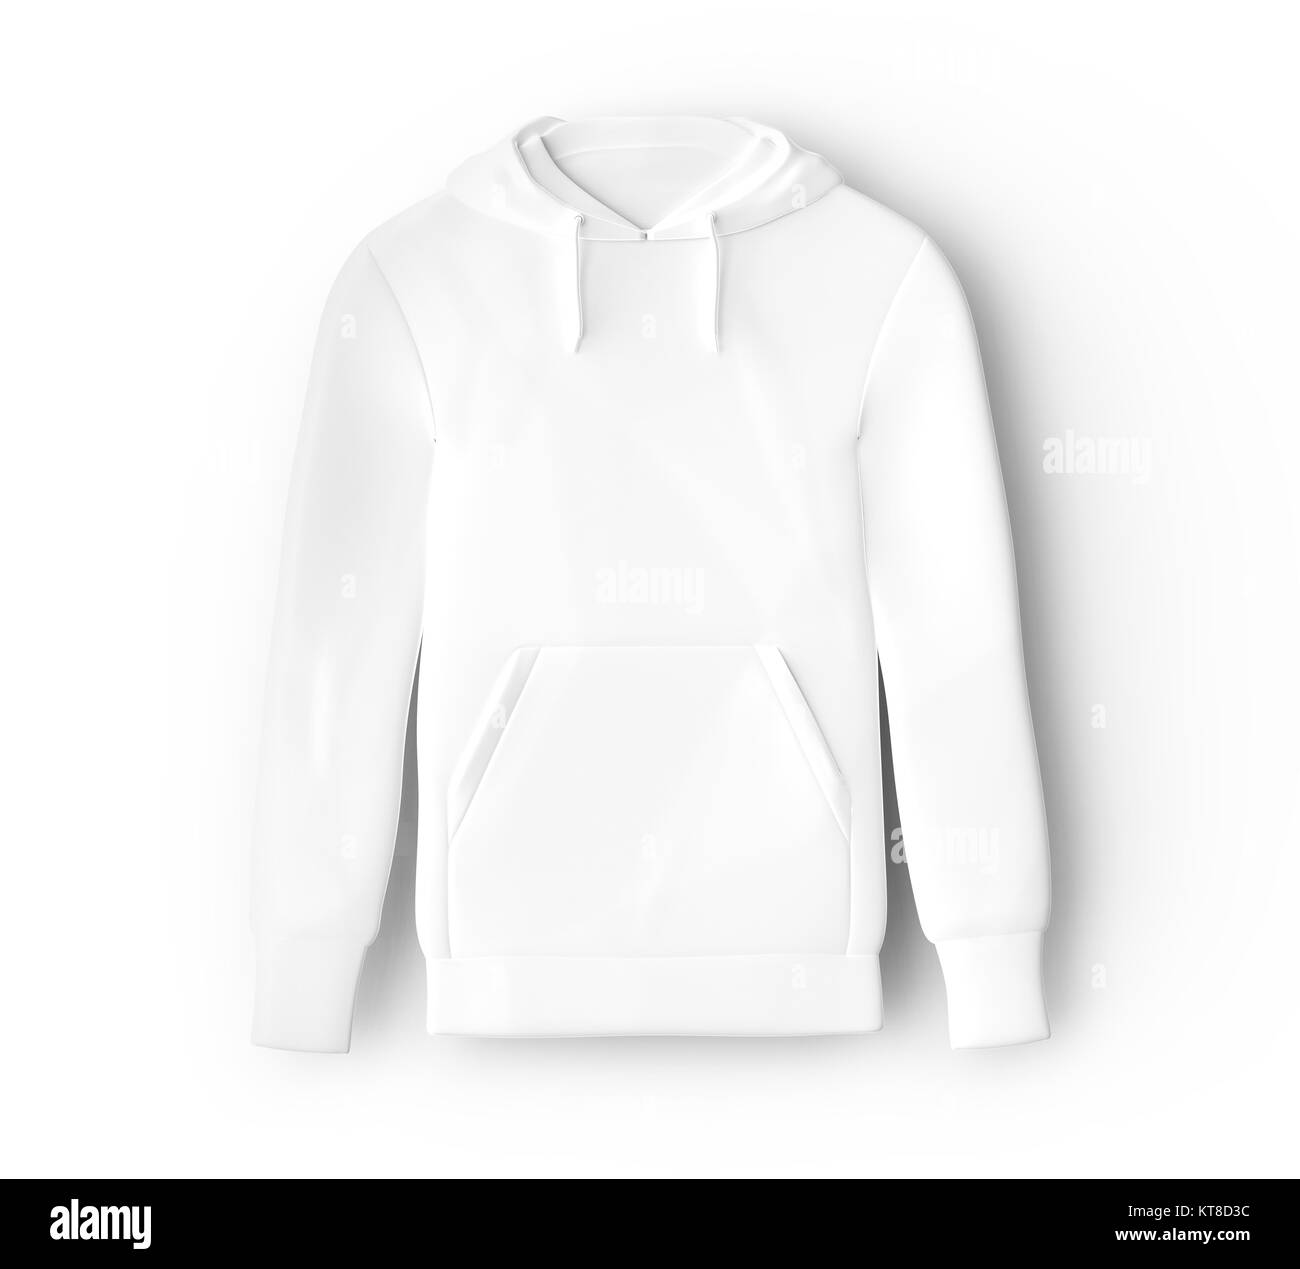 Hoodie sweatshirt mockup, blank white cloth template for men isolated on  white background, 3d render Stock Photo - Alamy